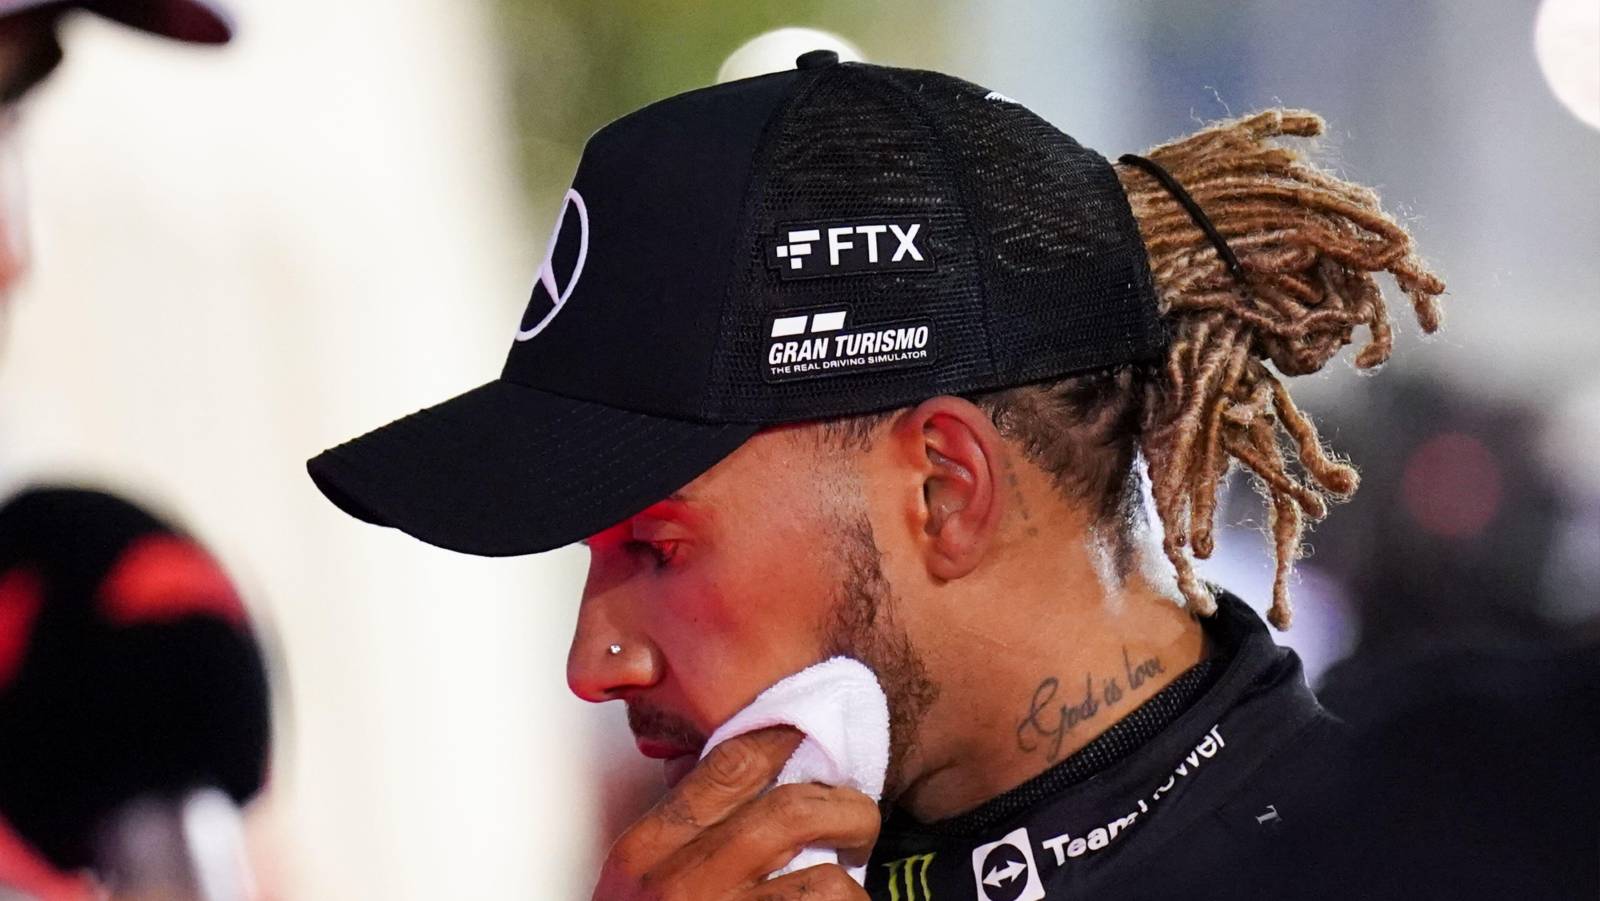 Lewis Hamilton wipes his face after a race. Bahrain March 2022.